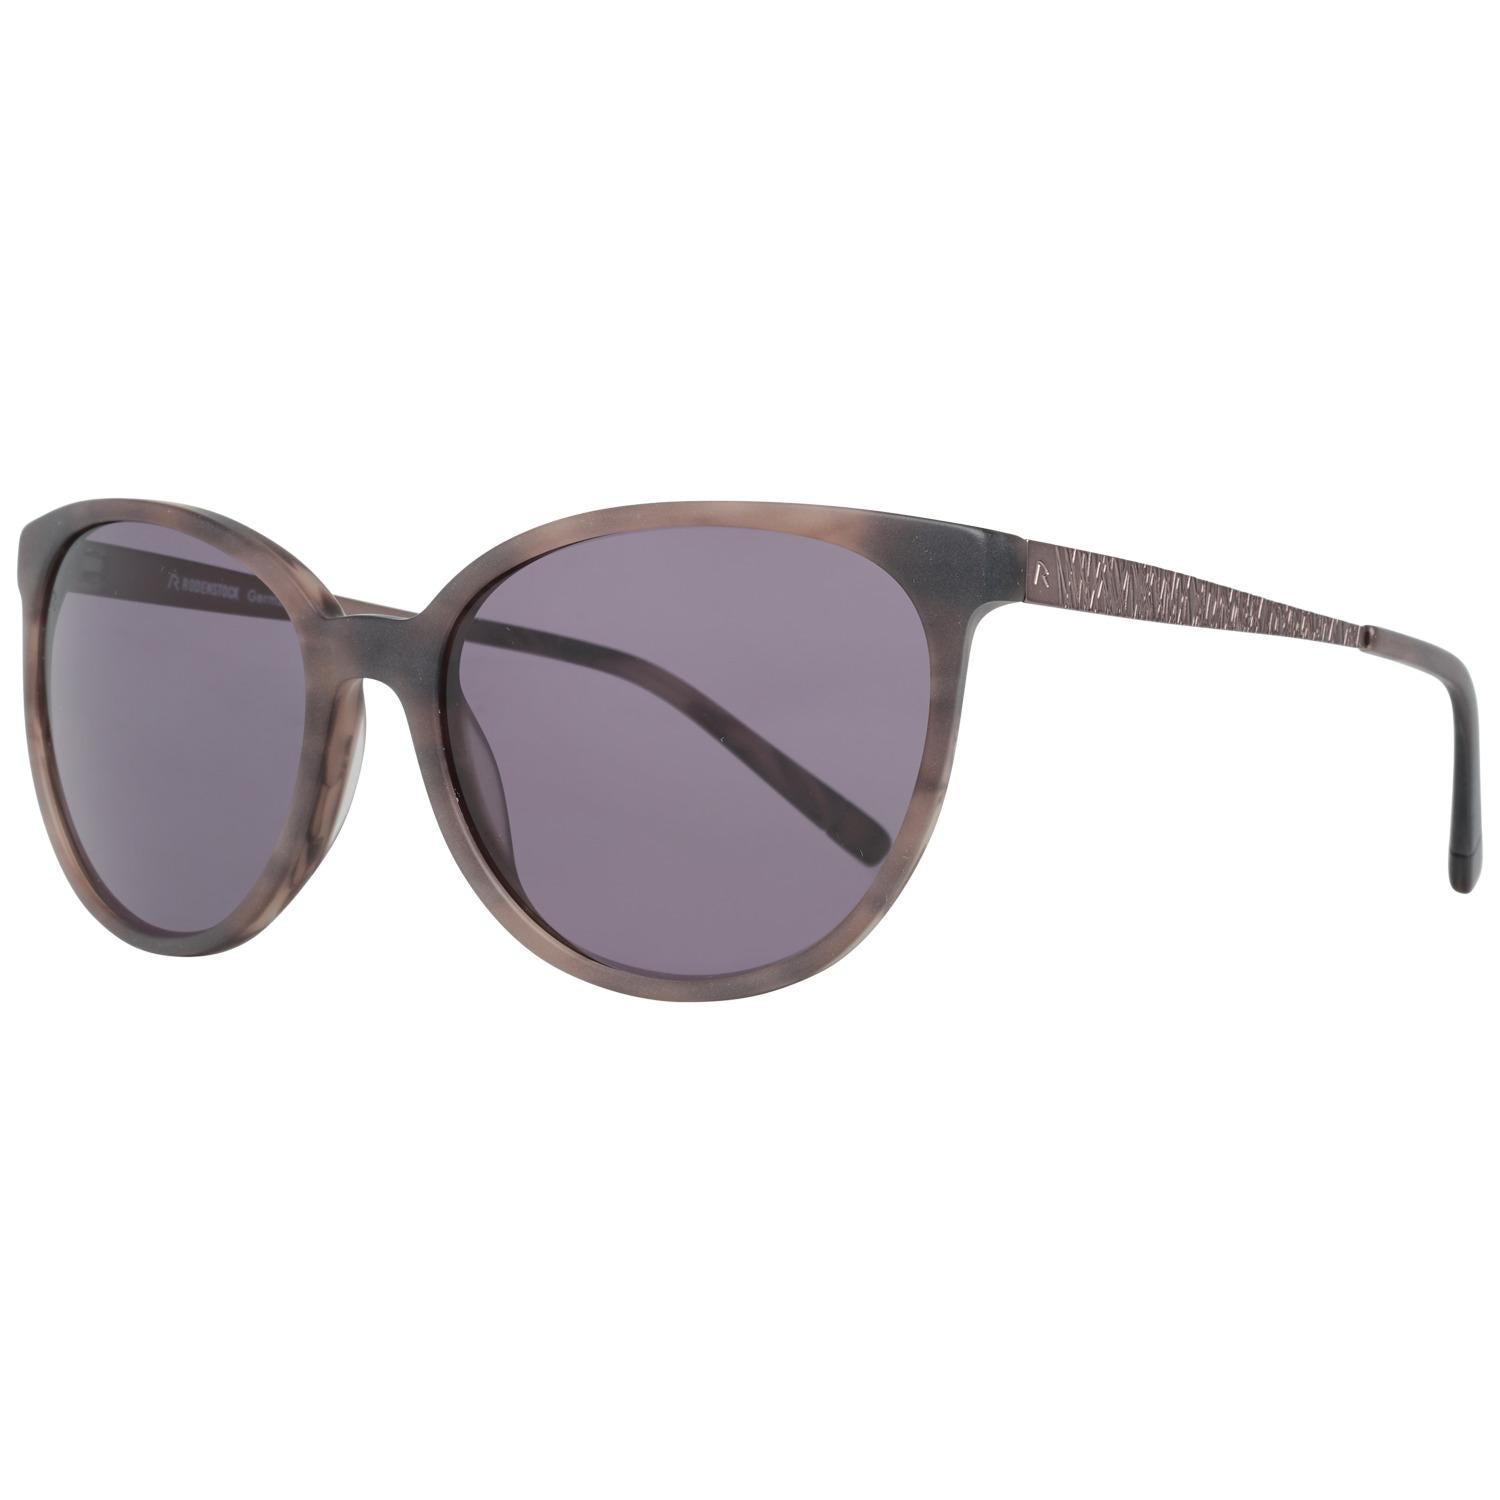 Details
MATERIAL: Metal
COLOR: Brown
MODEL: R3297 D 55
GENDER: Women
COUNTRY OF MANUFACTURE: China
TYPE: Sunglasses
ORIGINAL CASE?: Yes
STYLE: Butterfly
OCCASION: Casual
FEATURES: Lightweight
LENS COLOR: Grey
LENS TECHNOLOGY: No Extra
YEAR